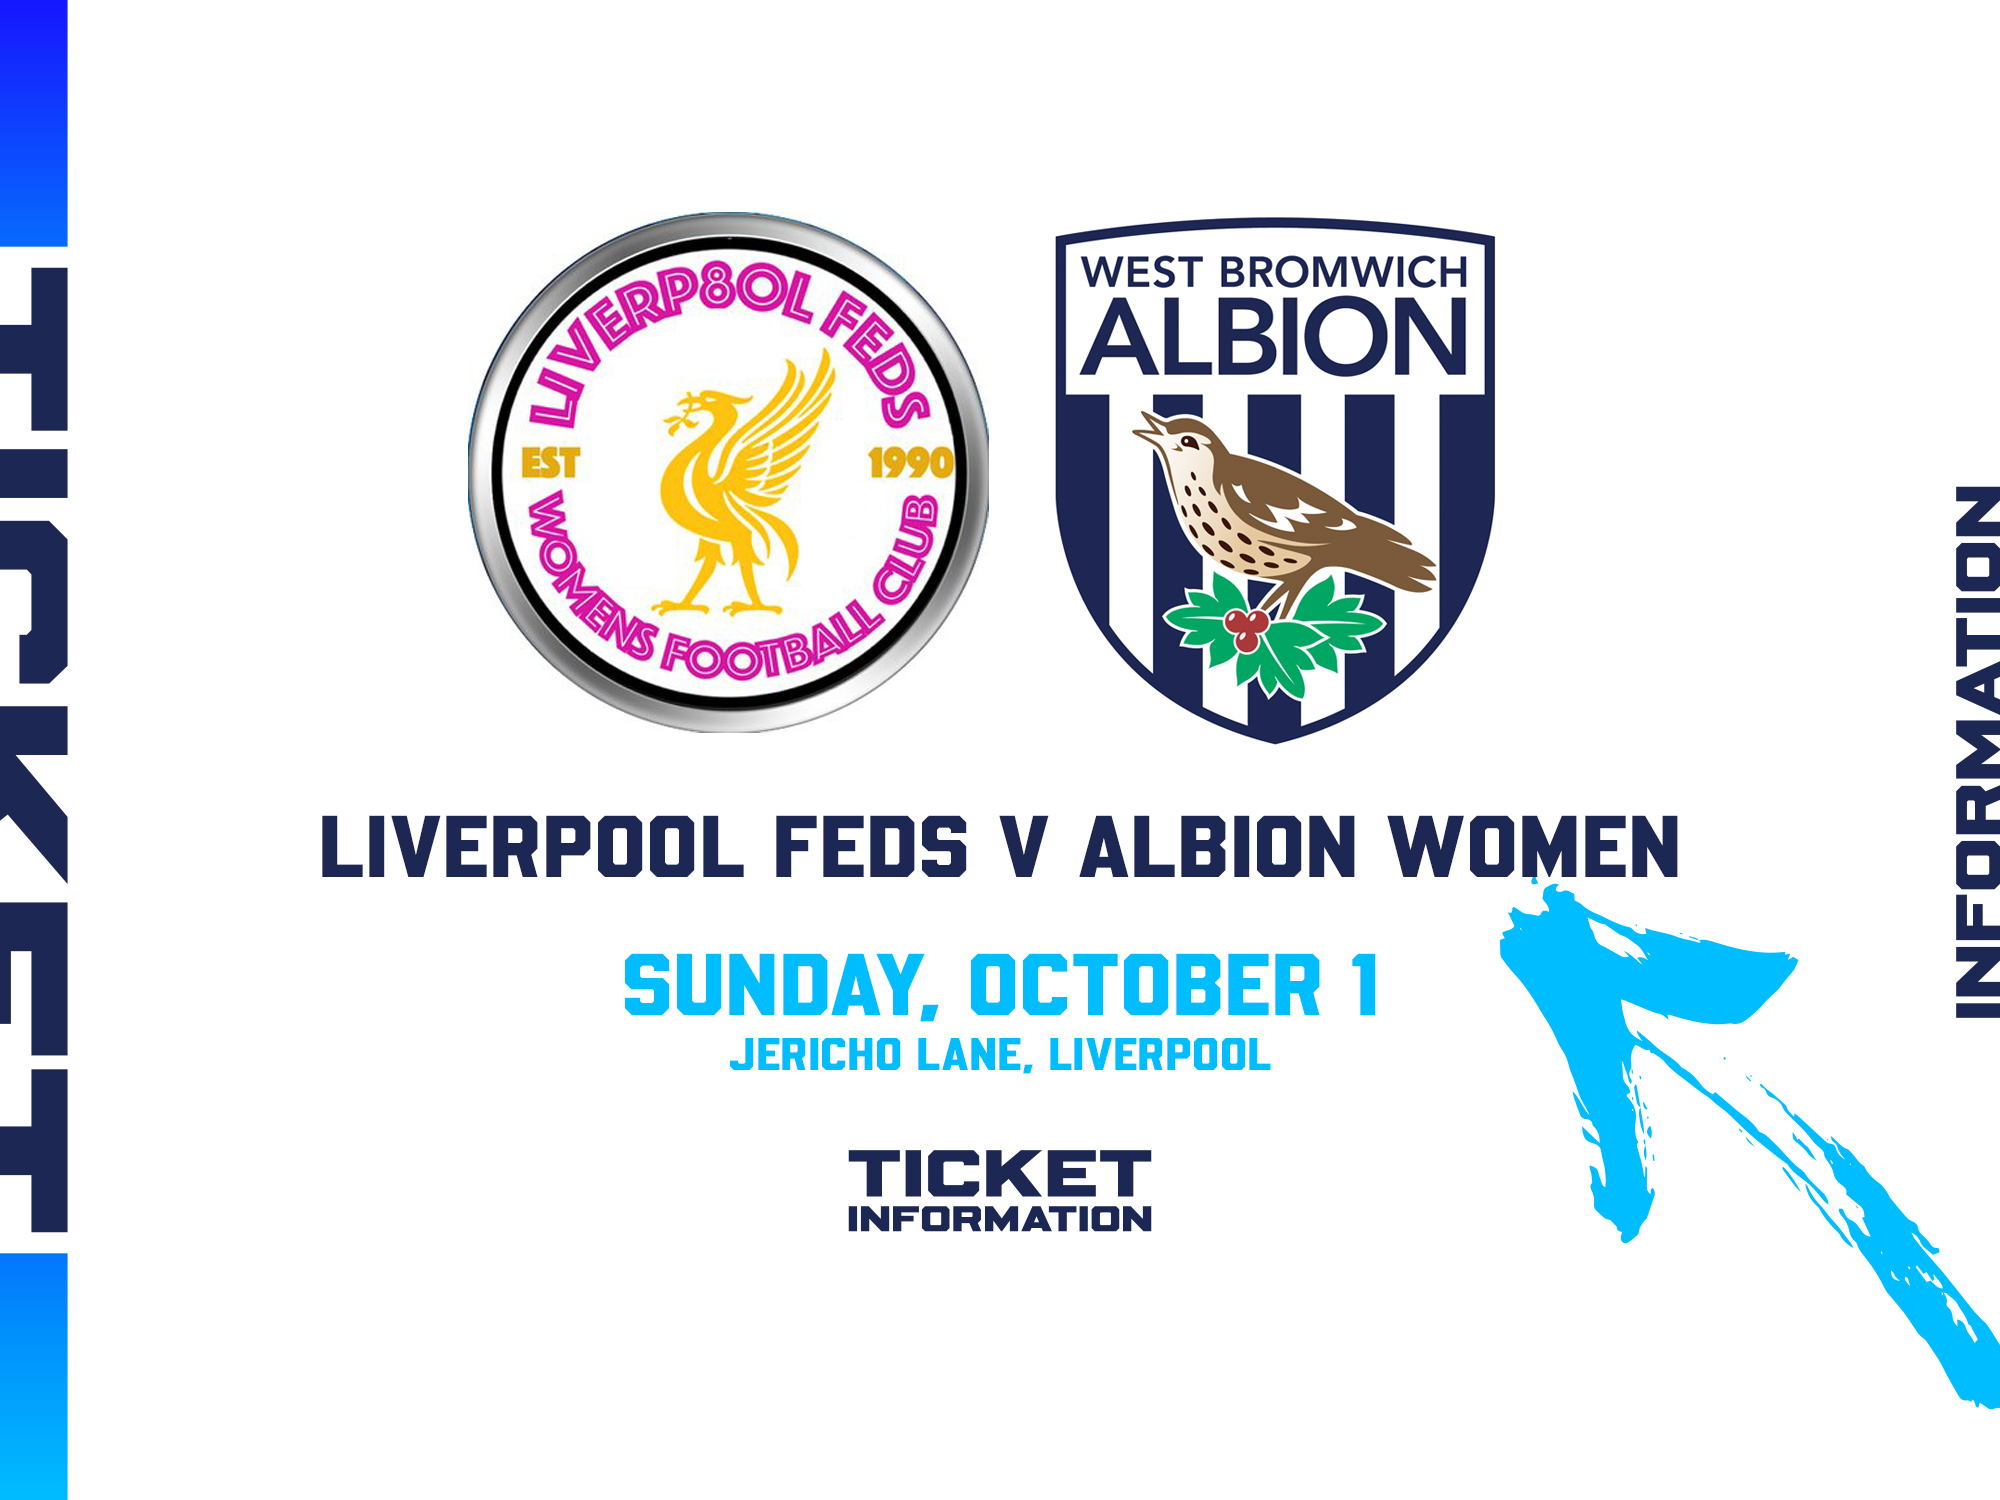 A ticket graphic displaying information for Albion Women's game against Liverpool Feds